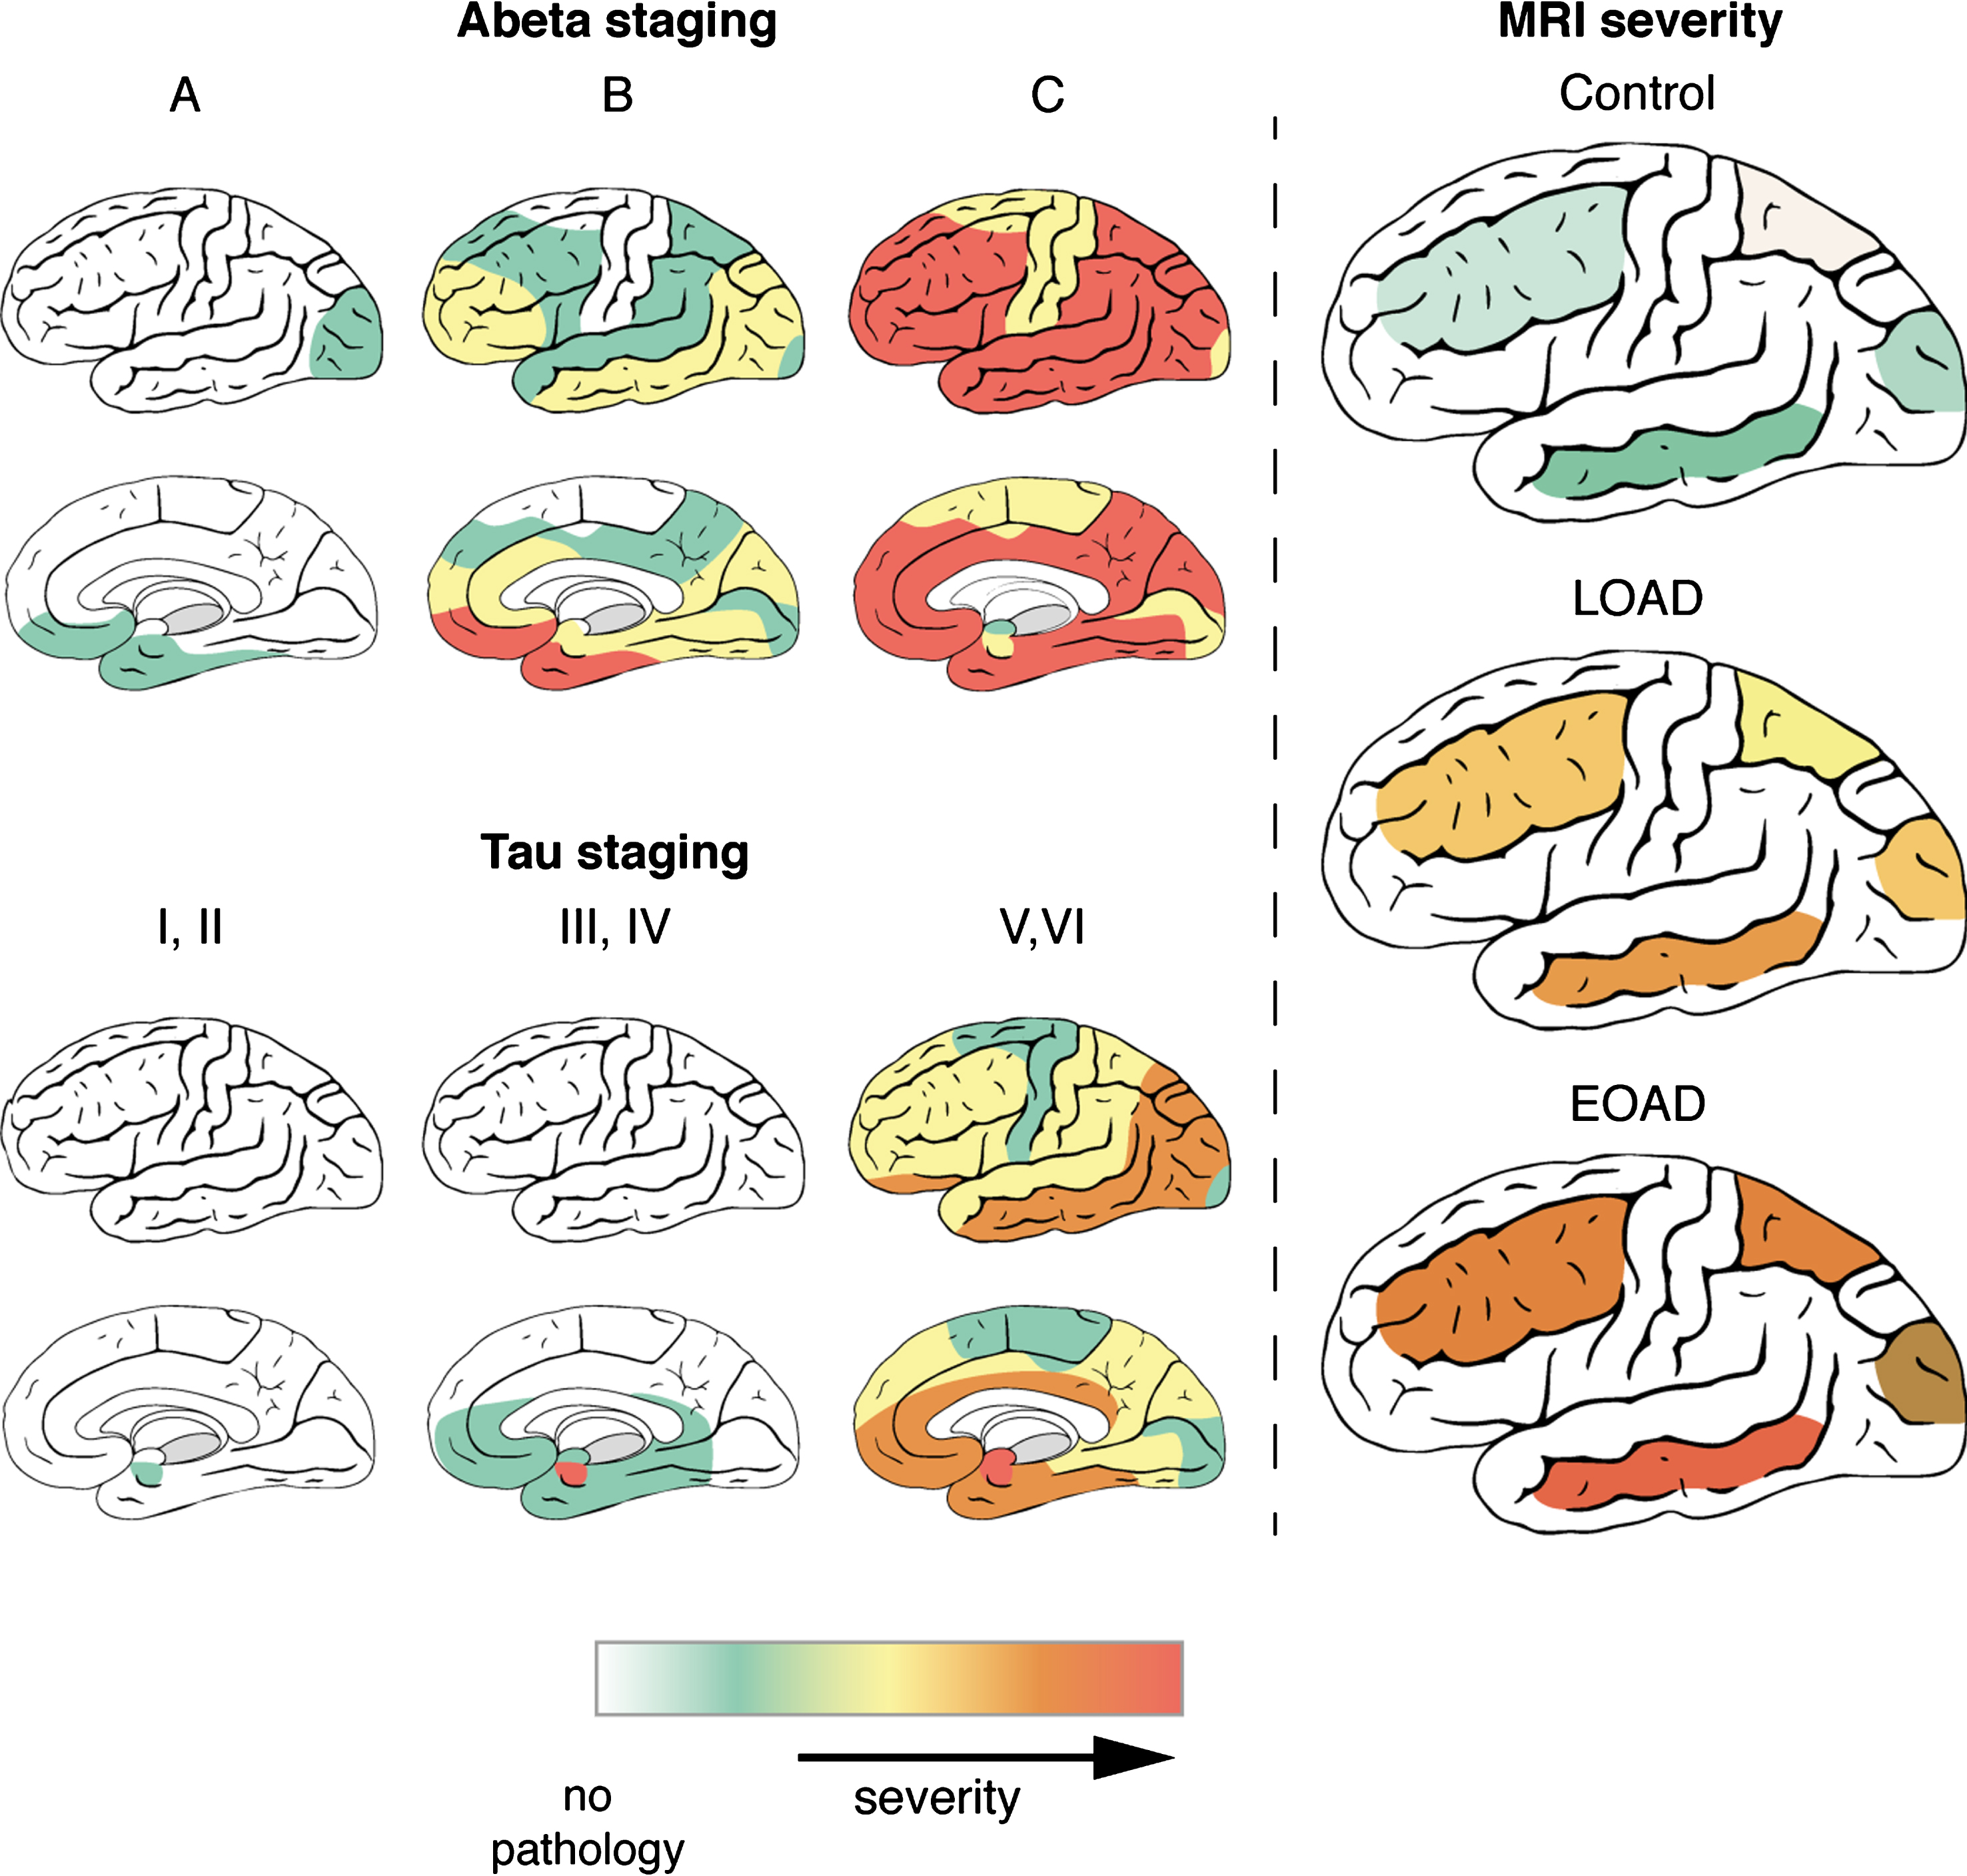 Distribution of AD pathology and MRI contrast changes over the cortex. During disease progression, both AD pathological hallmarks spread throughout the brain in characteristic patterns, which are not the same for Aβ and tau. As described previously, Aβ plaques are first found in the basal parts of the frontal, occipital, and temporal lobe and gradually spread throughout the whole cortex. In later stages, Aβ plaques are also found in allocortical regions, the striatum, brainstem nuclei and eventually in the cerebellum. In contrast to Aβ plaques, tau tangles are first detected in the transentorhinal region of the middle temporal lobe. Subsequently, the basal parts of the frontal and temporal lobe are affected and finally the entire cortex, including the striatal cortex. In the histologically determined stages of AD pathology as well as the MRI contrast changes, the temporal lobe is the most affected region corresponding to the distribution pattern of tau pathology. Even in controls, which have only limited tau pathology and MRI contrast changes, the temporal lobe is most affected. Severity scales ranges for Aβ and tau staging from no pathology (white) to severe pathology (red). For MRI, MRI severity scores were calculated for specific cortical regions based on presence of a diffuse hypointense band (Methods). MRI severity scales ranges from severity not determined (white) to severe MRI changes (red).